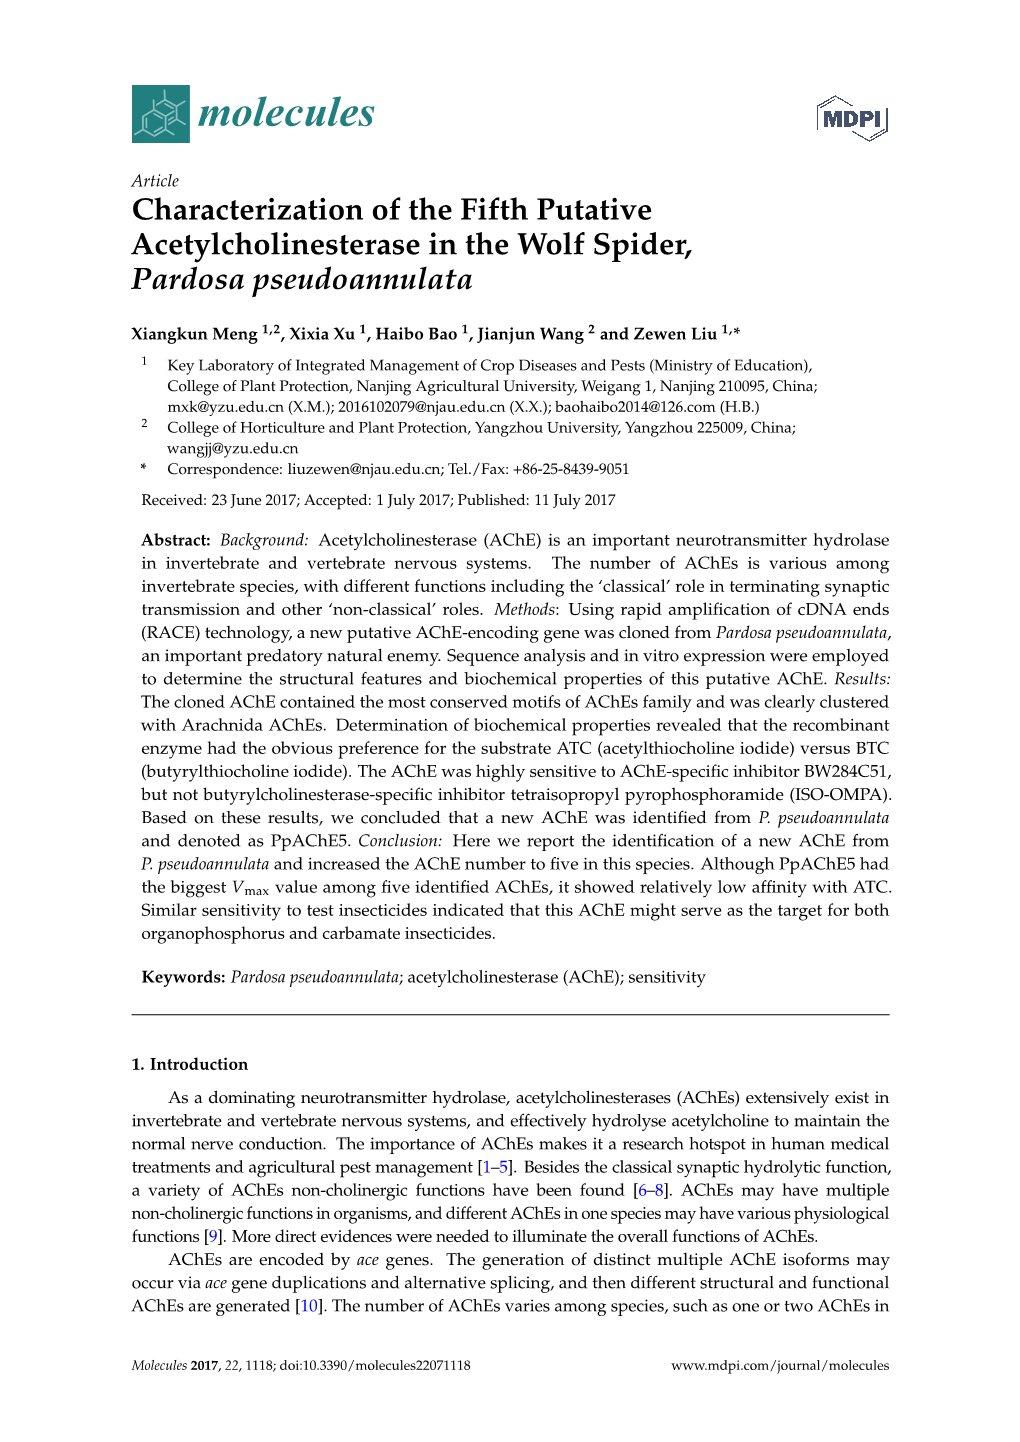 Characterization of the Fifth Putative Acetylcholinesterase in the Wolf Spider, Pardosa Pseudoannulata